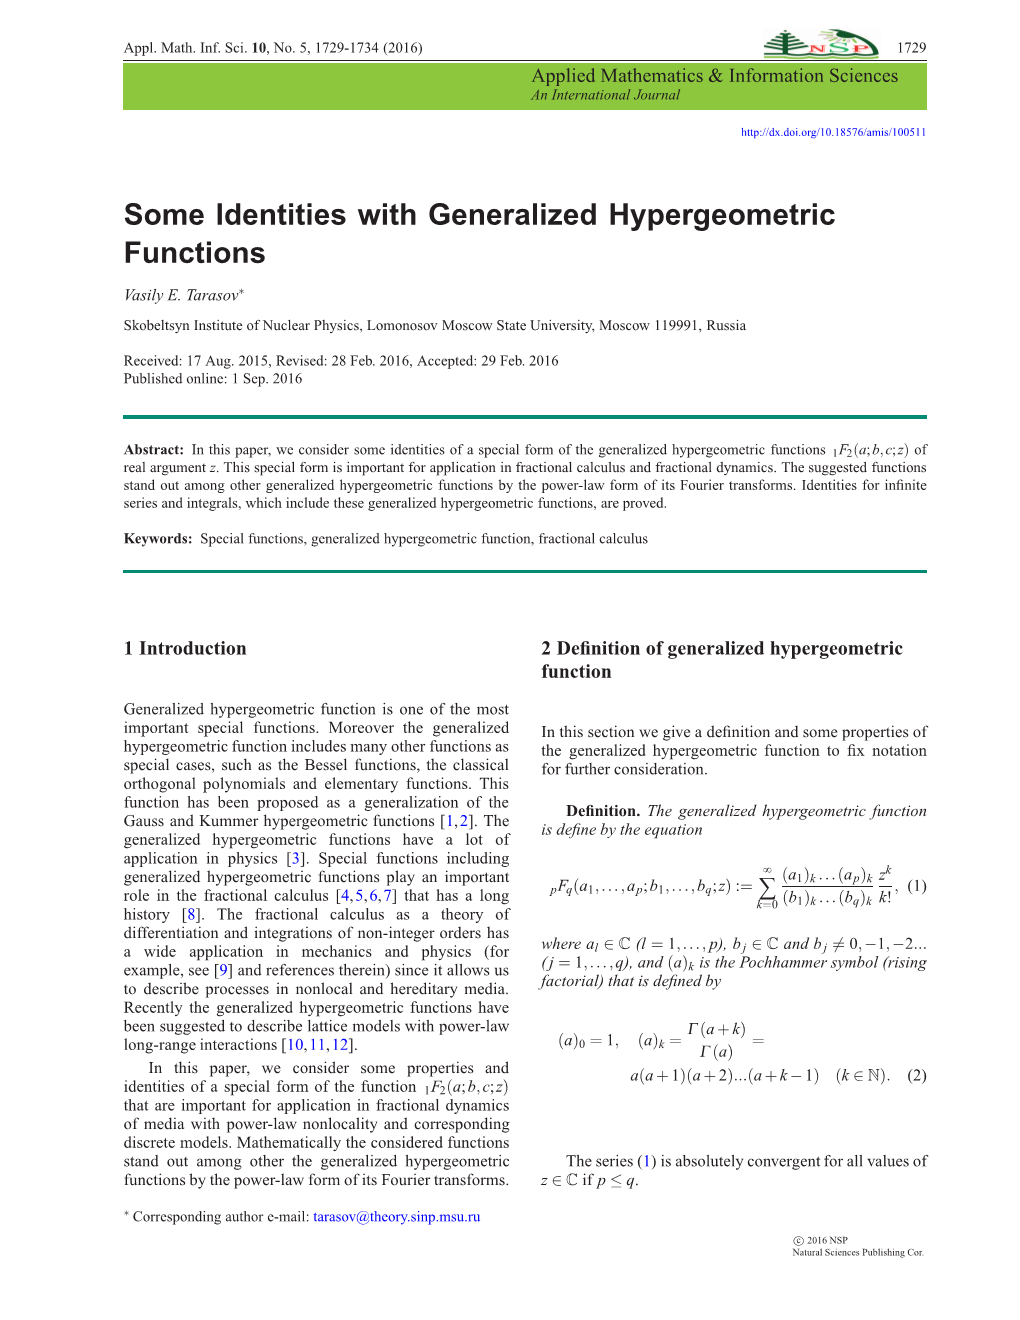 Some Identities with Generalized Hypergeometric Functions